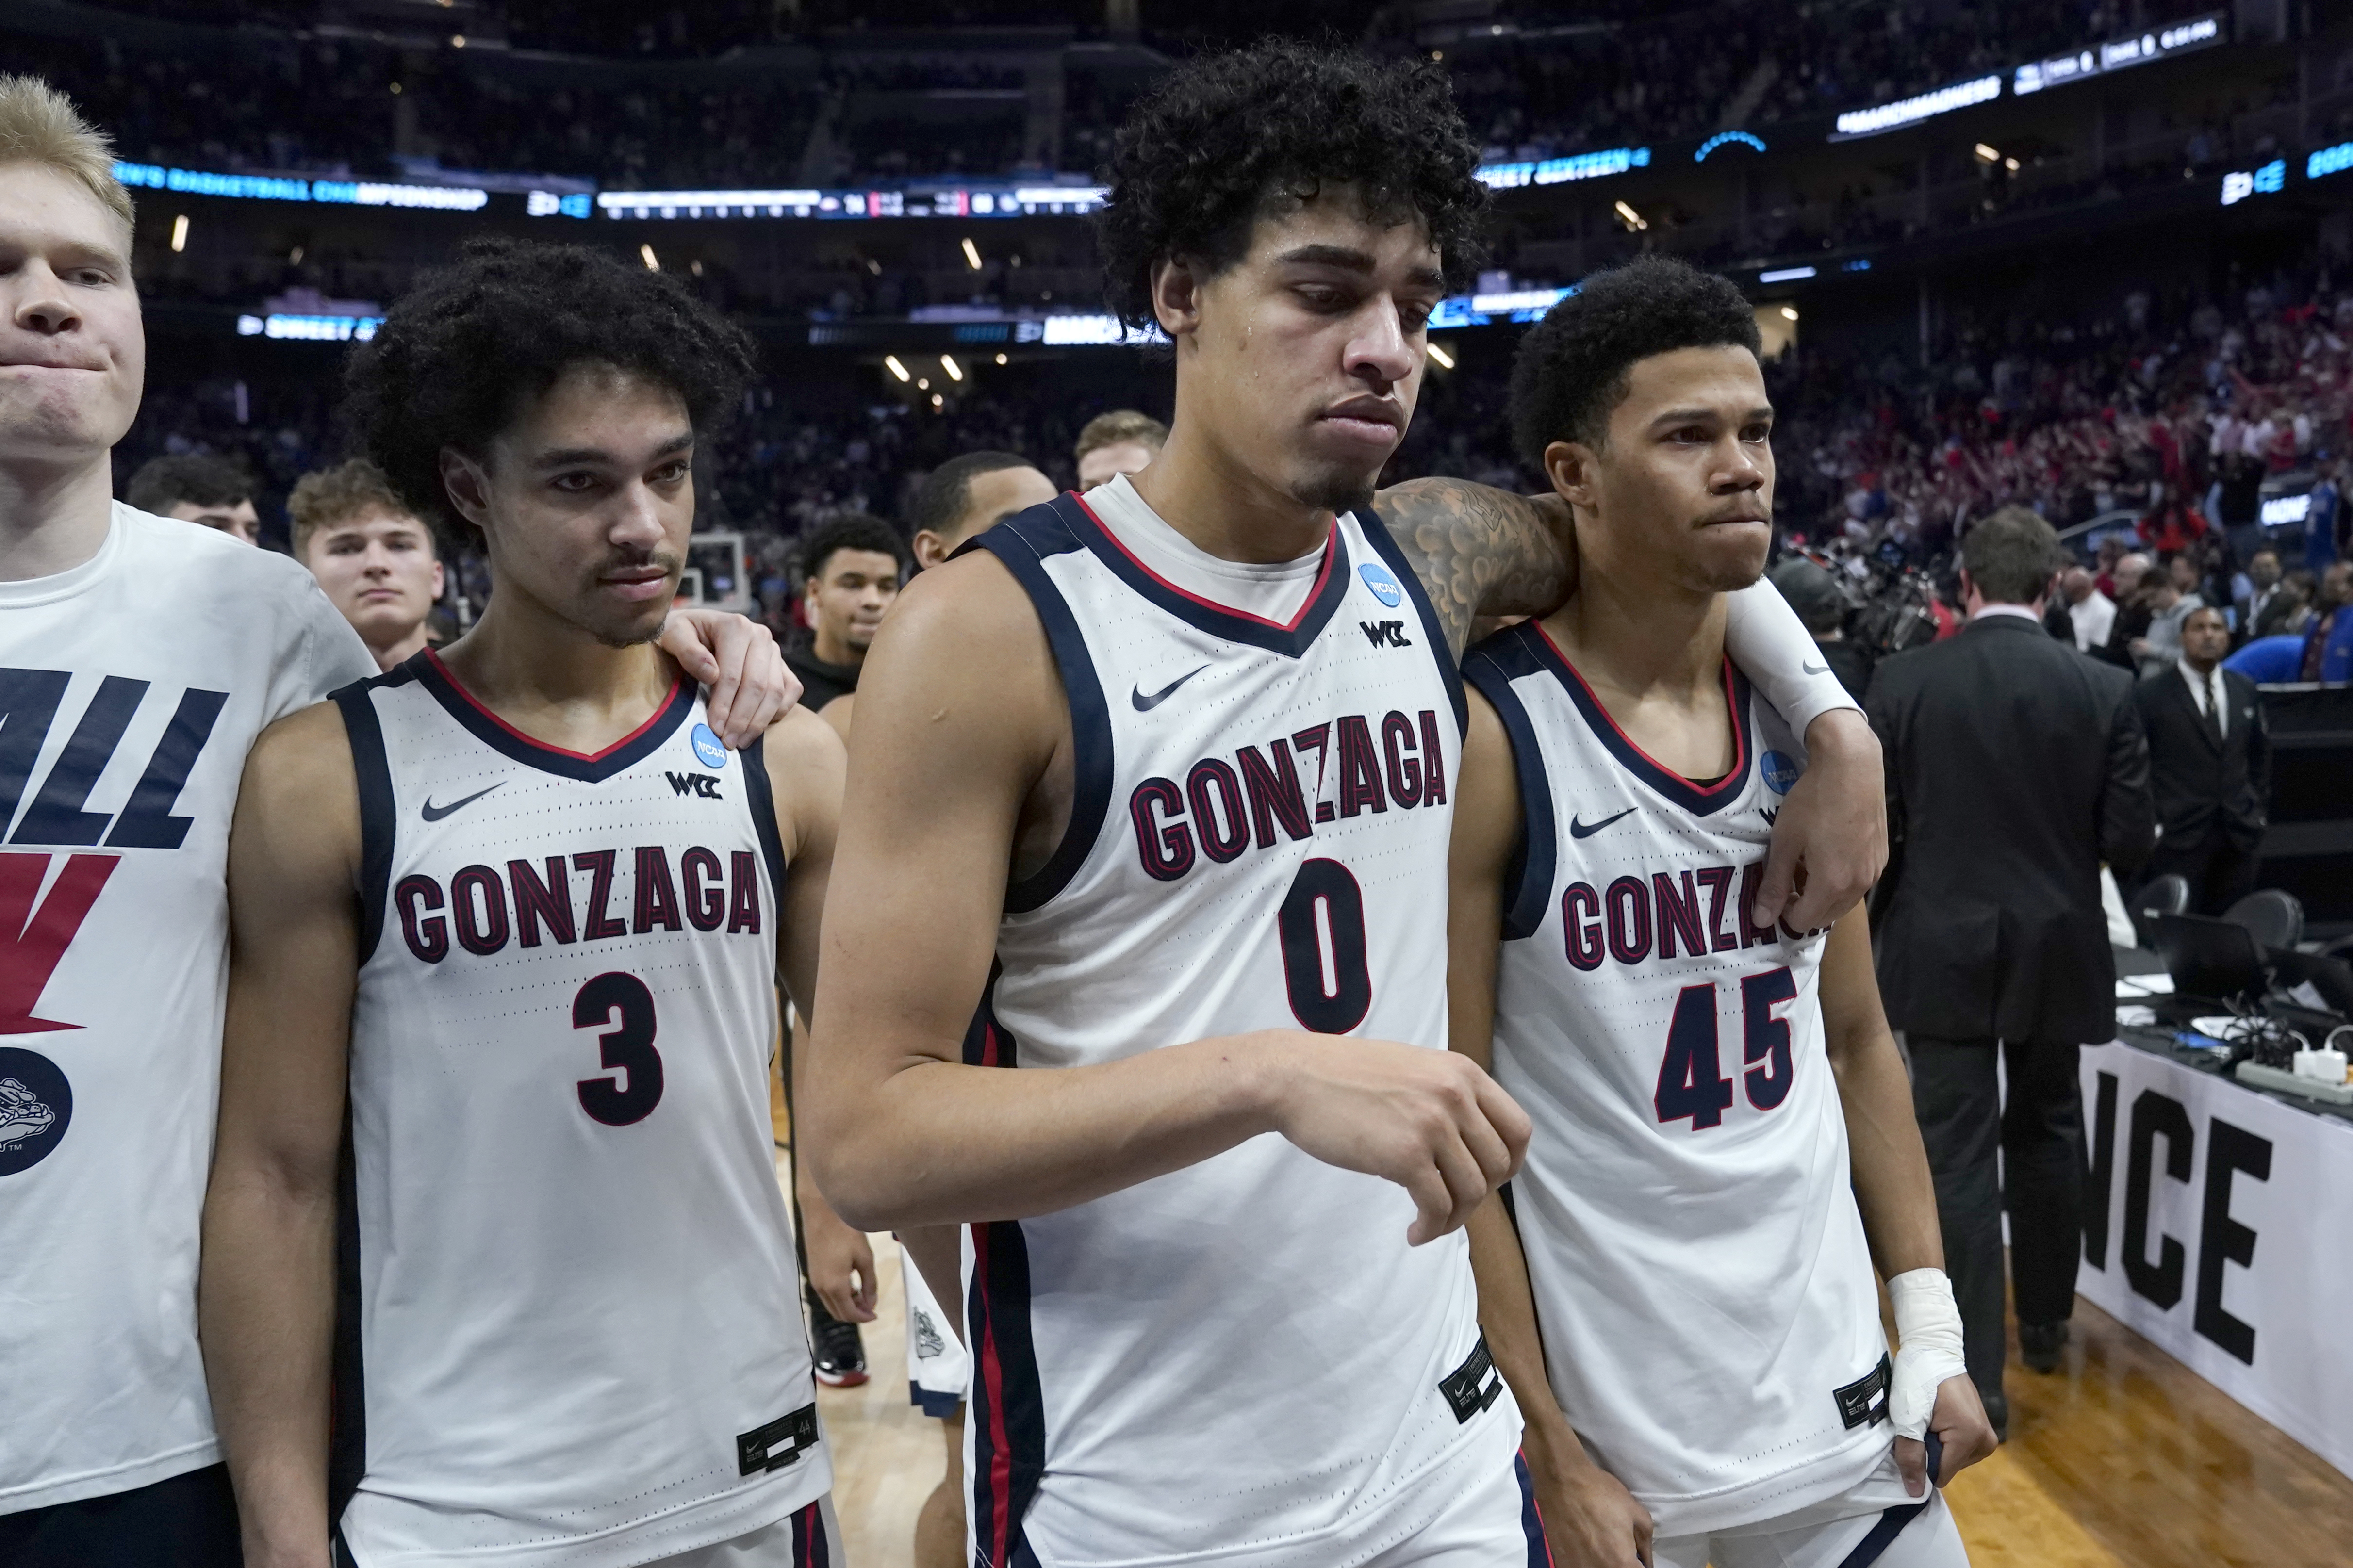 What channel is the Gonzaga basketball game on tonight? FREE live stream, time, TV, channel for Gonzaga vs